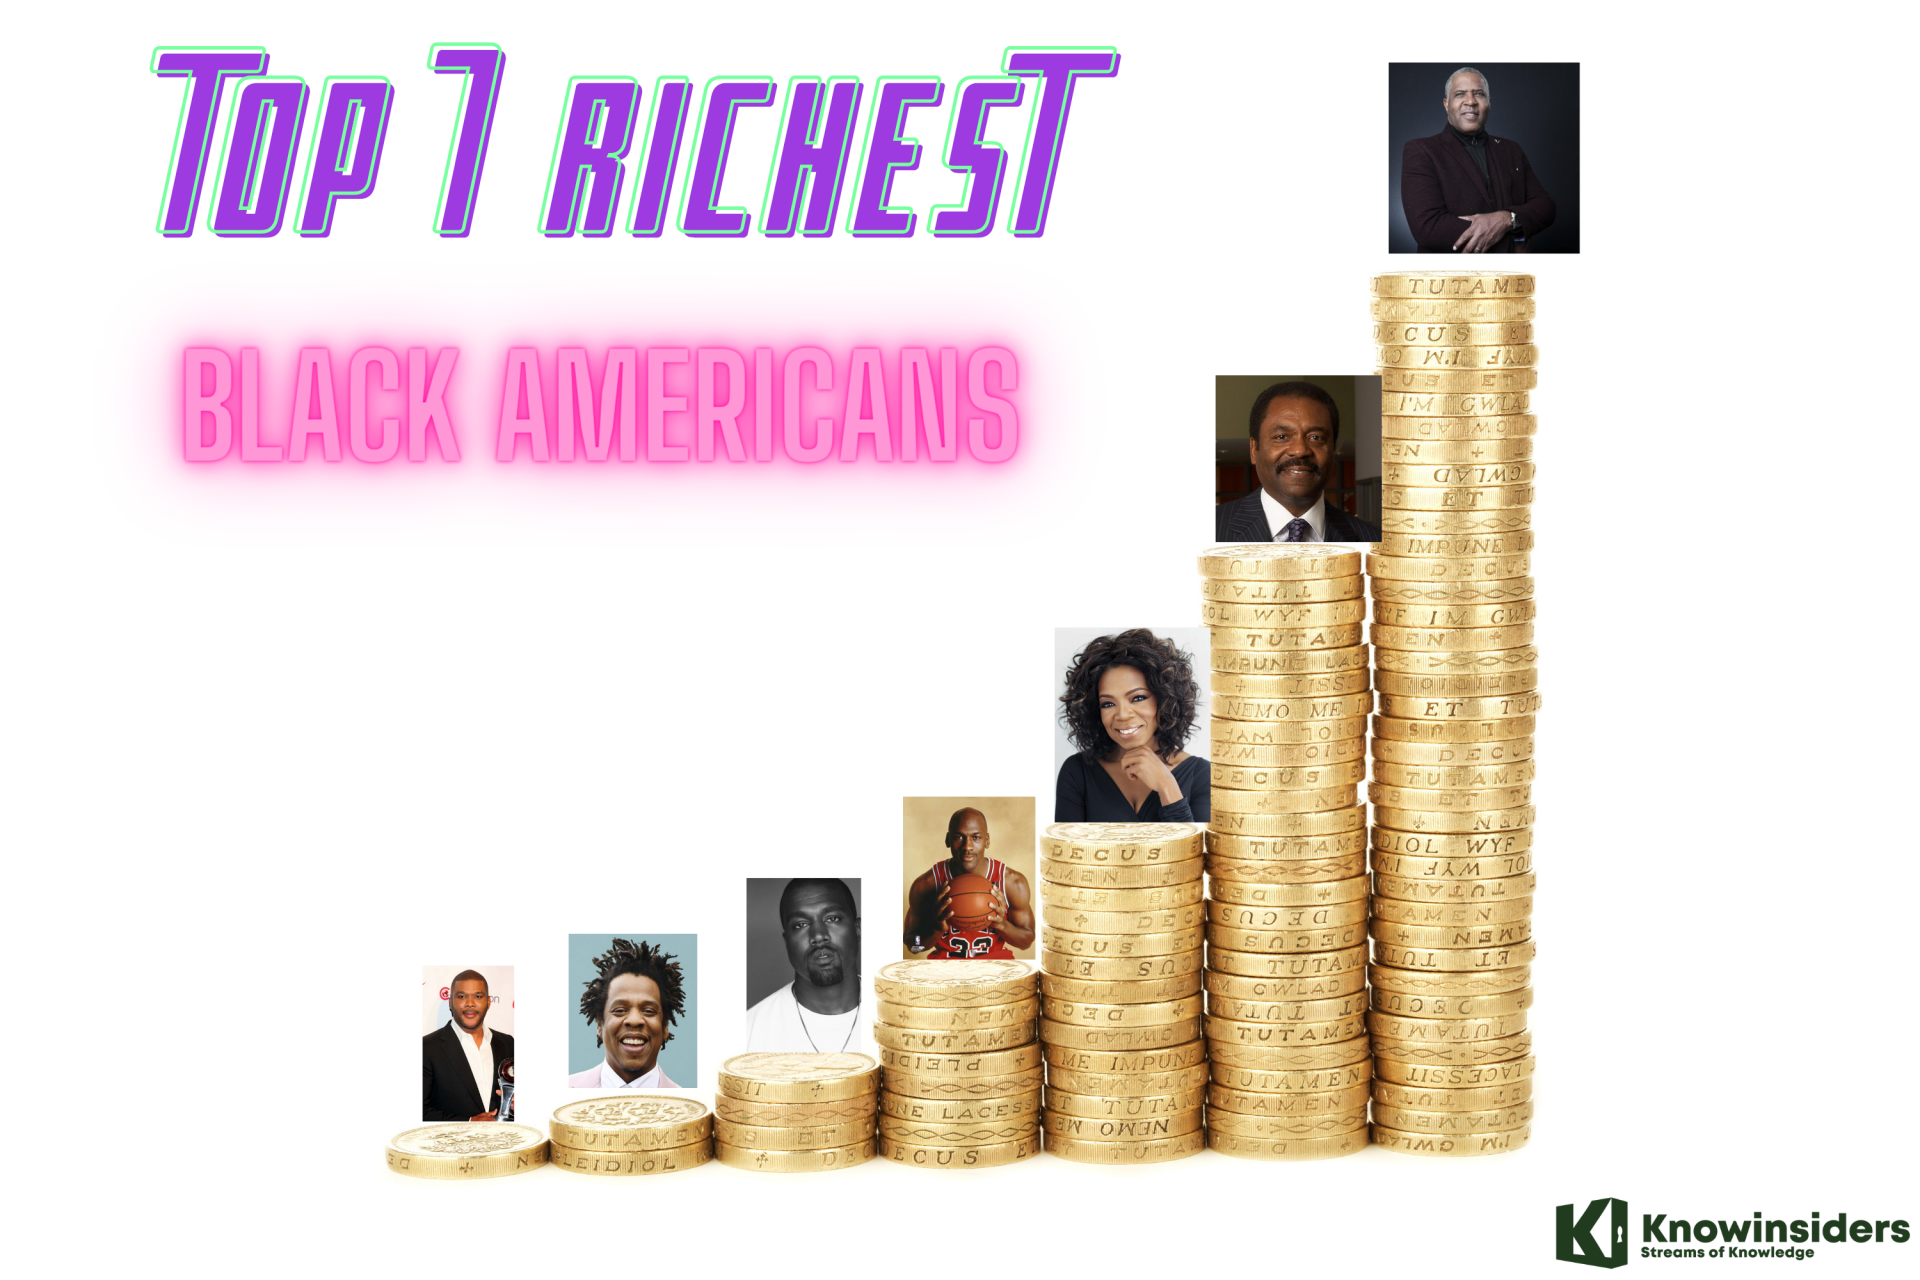 7 Richest Black Americans Today